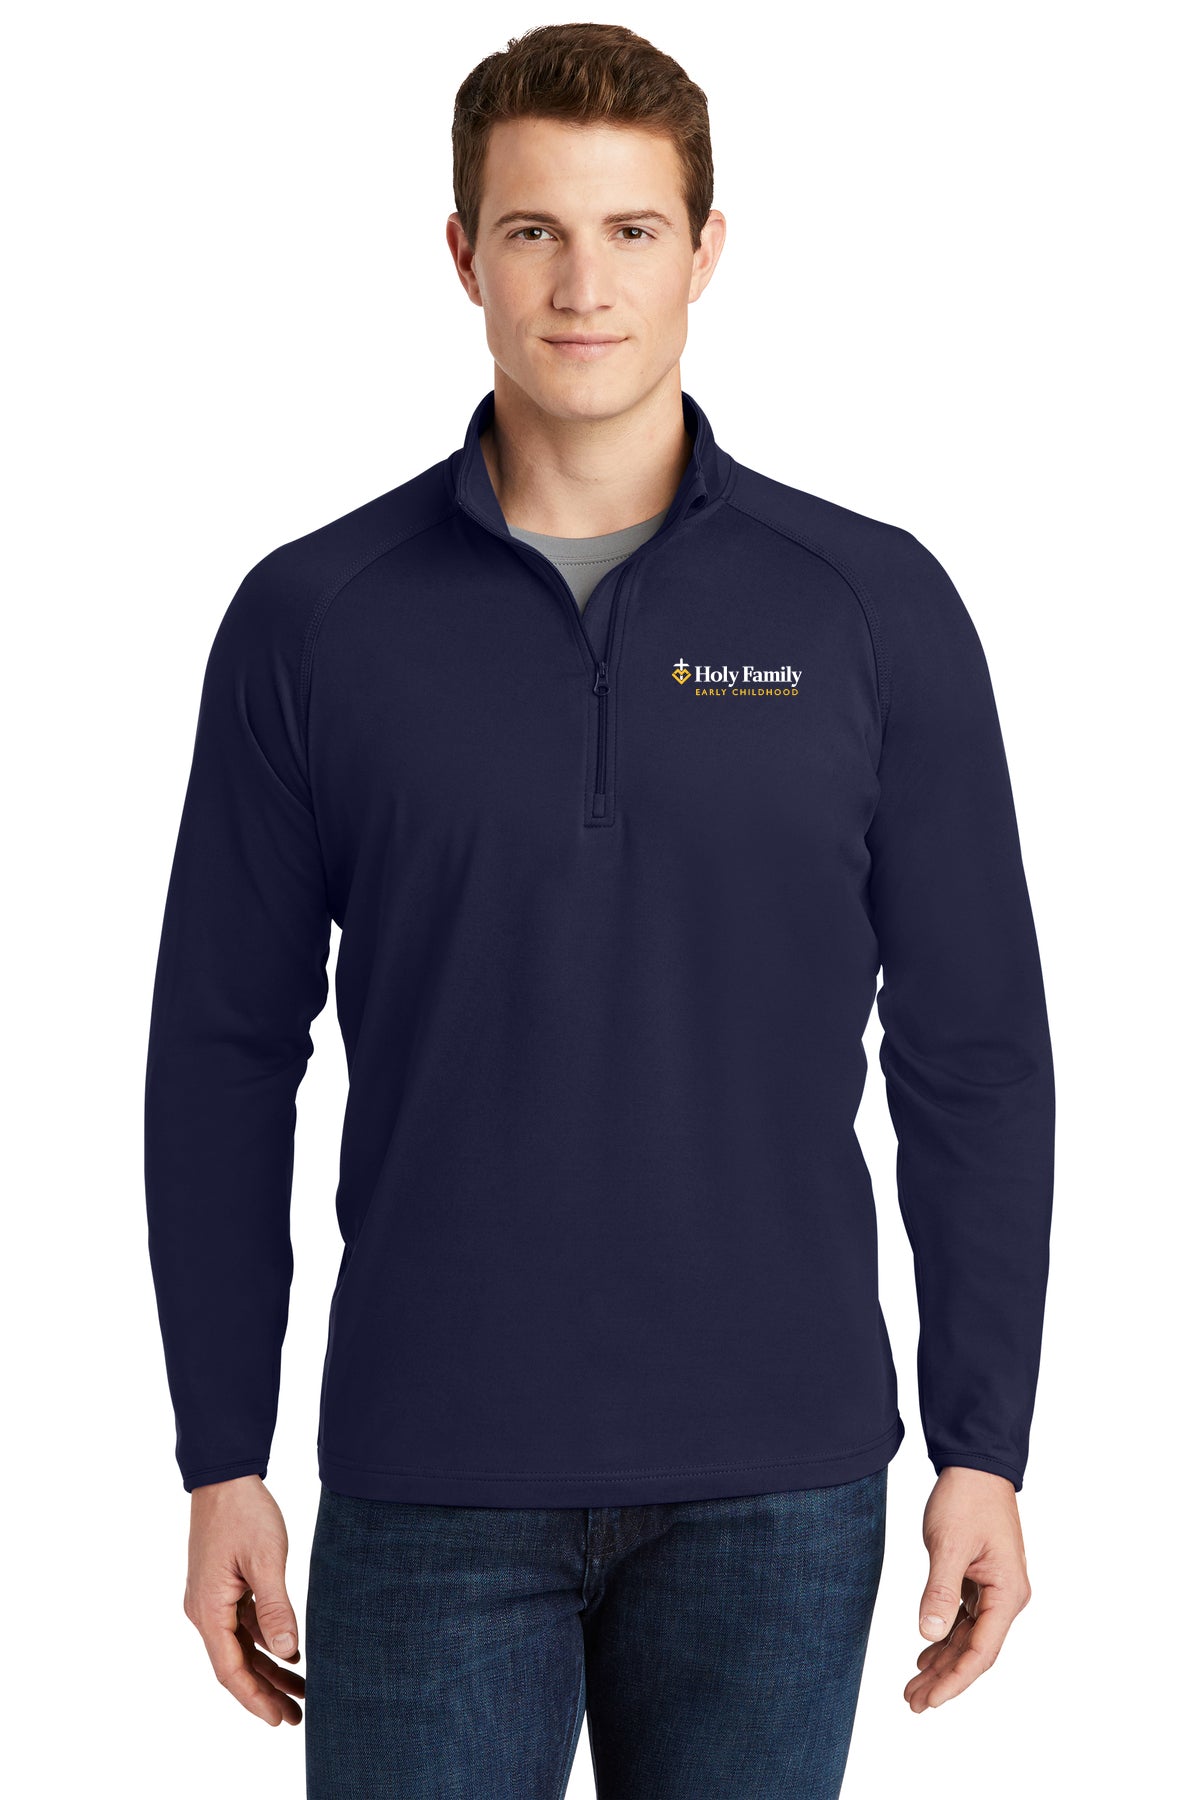 ST850 - HOLY FAMILY EARLY CHILDHOOD STAFF - Men’s Sport Wick Zip Pullover